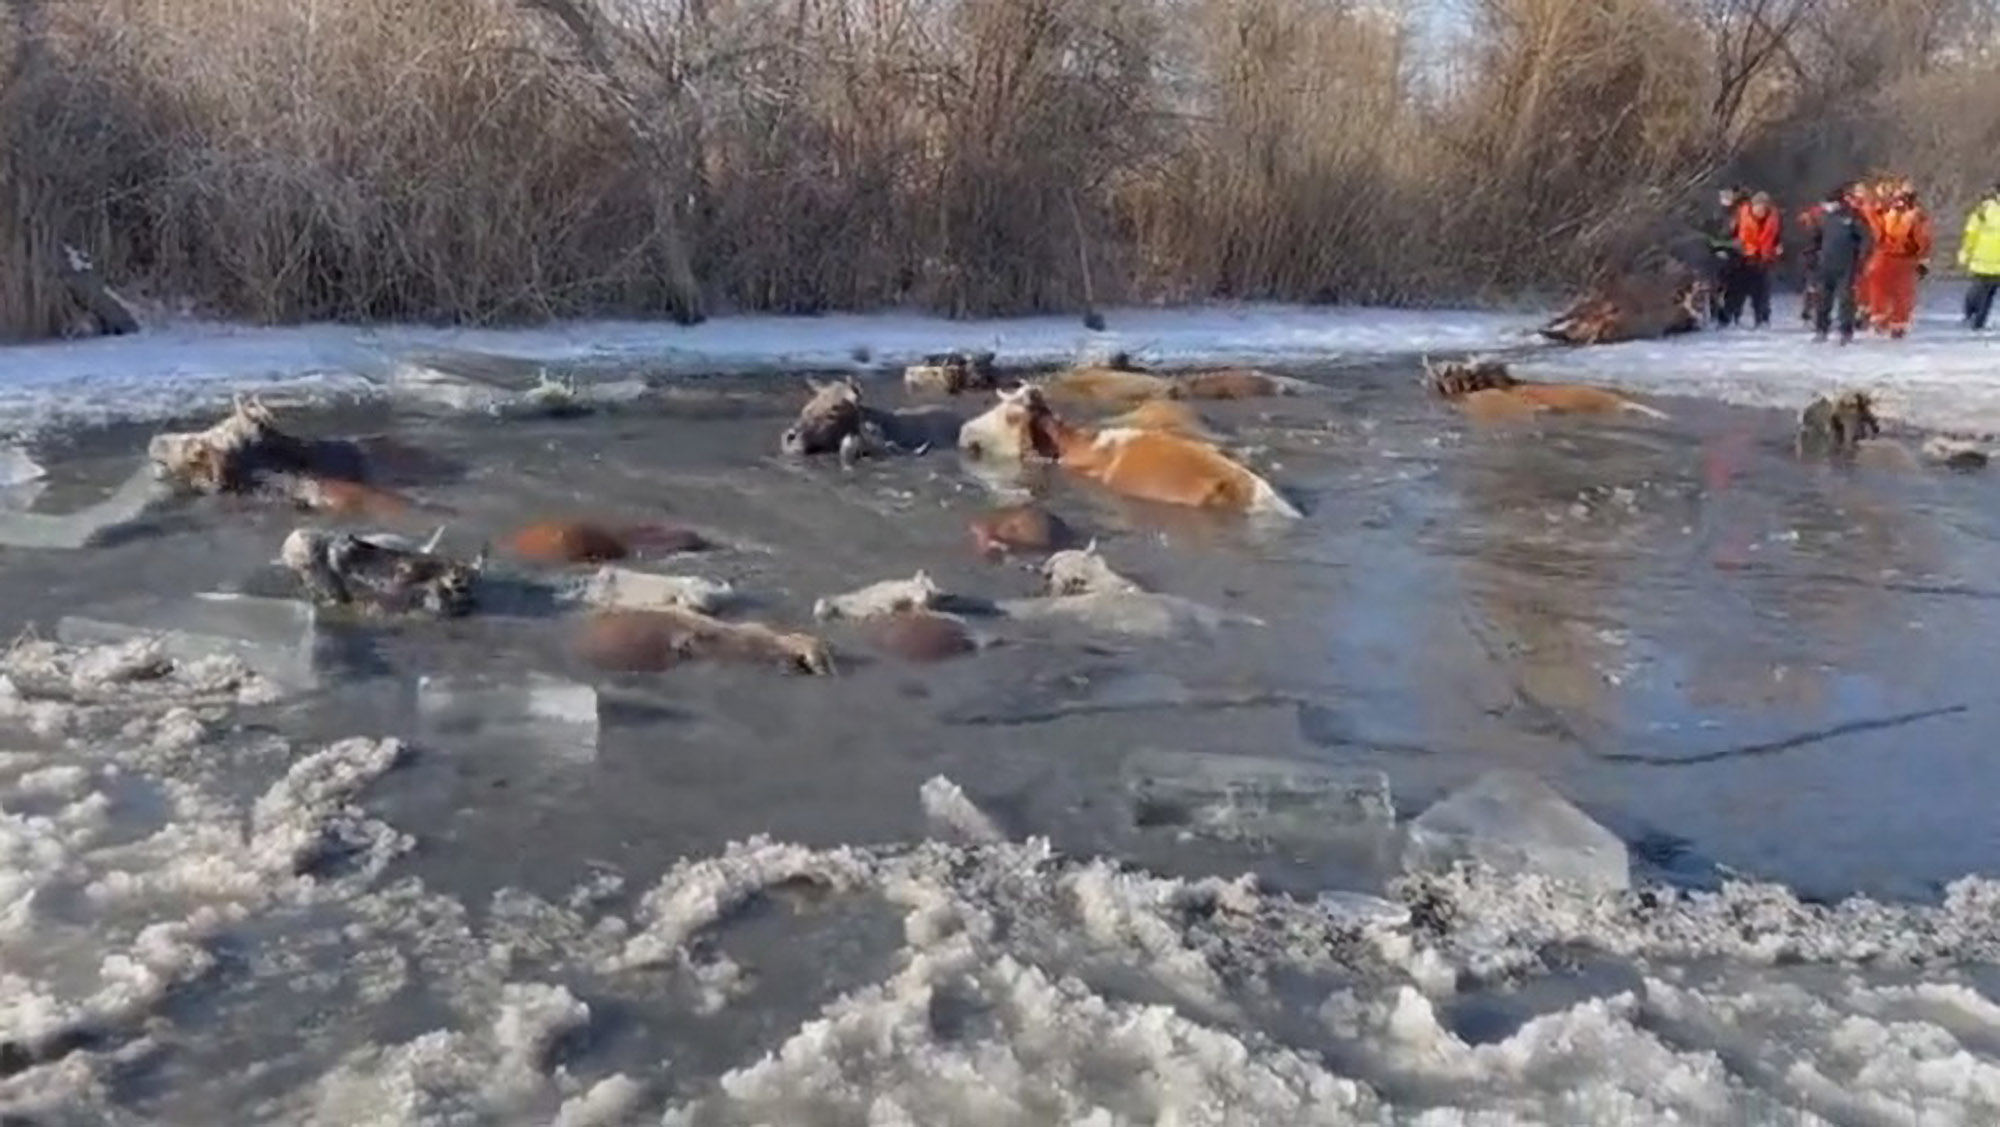 Read more about the article Rescuers Pull Cows From Freezing Pond Using Ropes After 20 Of The Bovines Fell Through The Ice